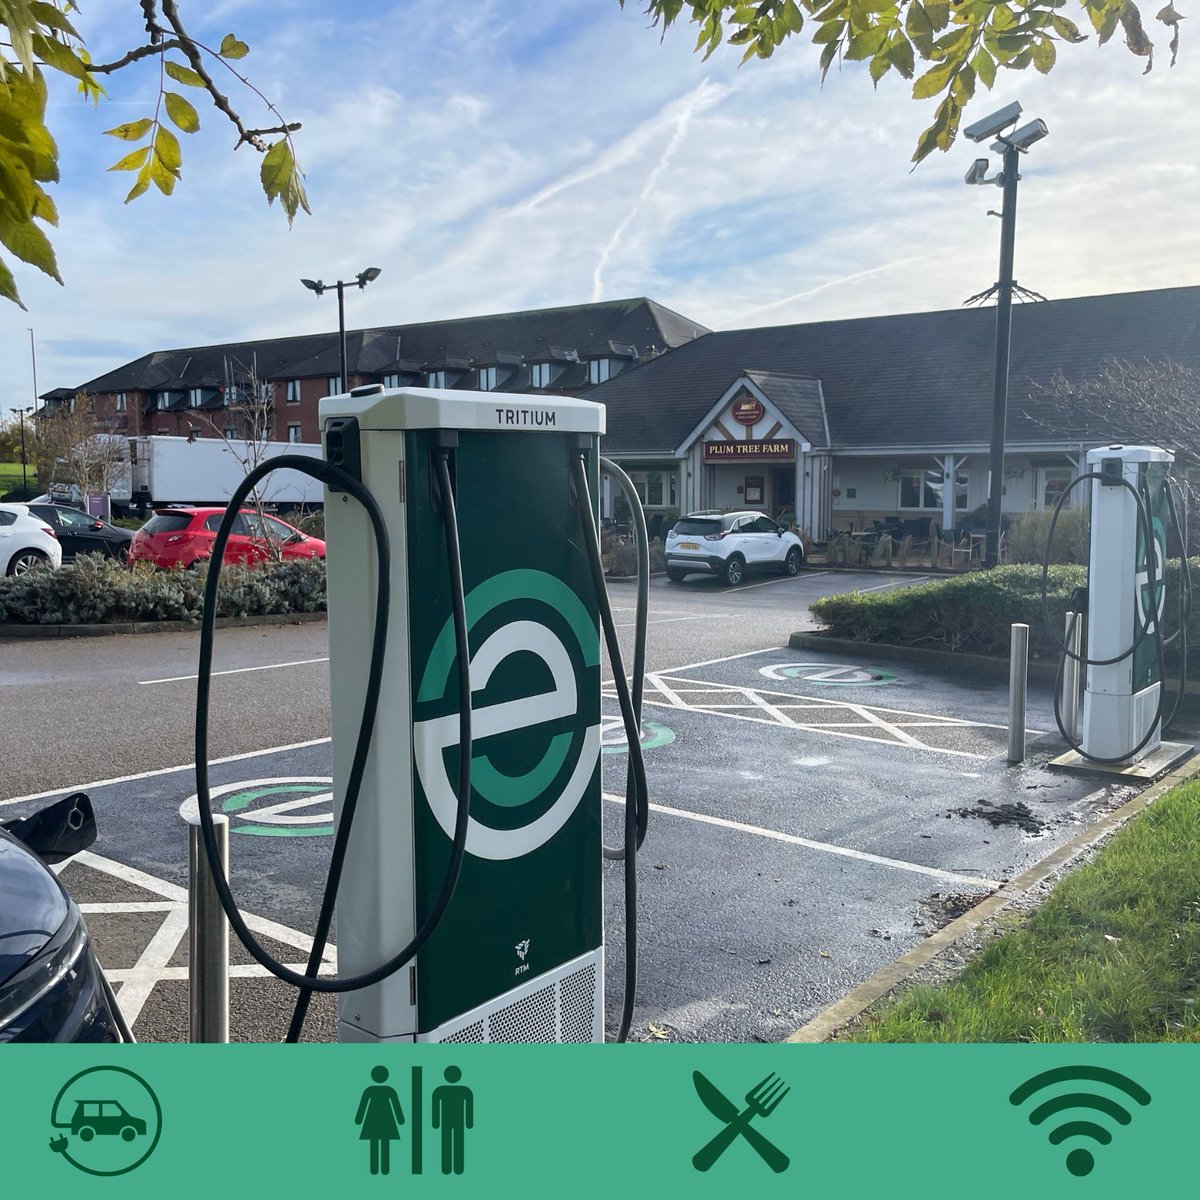 Wishing all our customers a Happy #MayBankHoliday and safe travels! 🌟 

Enjoy our unique amenities like free Wi-Fi, clean restrooms, snacks, and comfortable seating at every evyve charging station ⚡

#Evyve #EV #SustainableCharging #EVCharging #ElectricVehicle #EVChargers